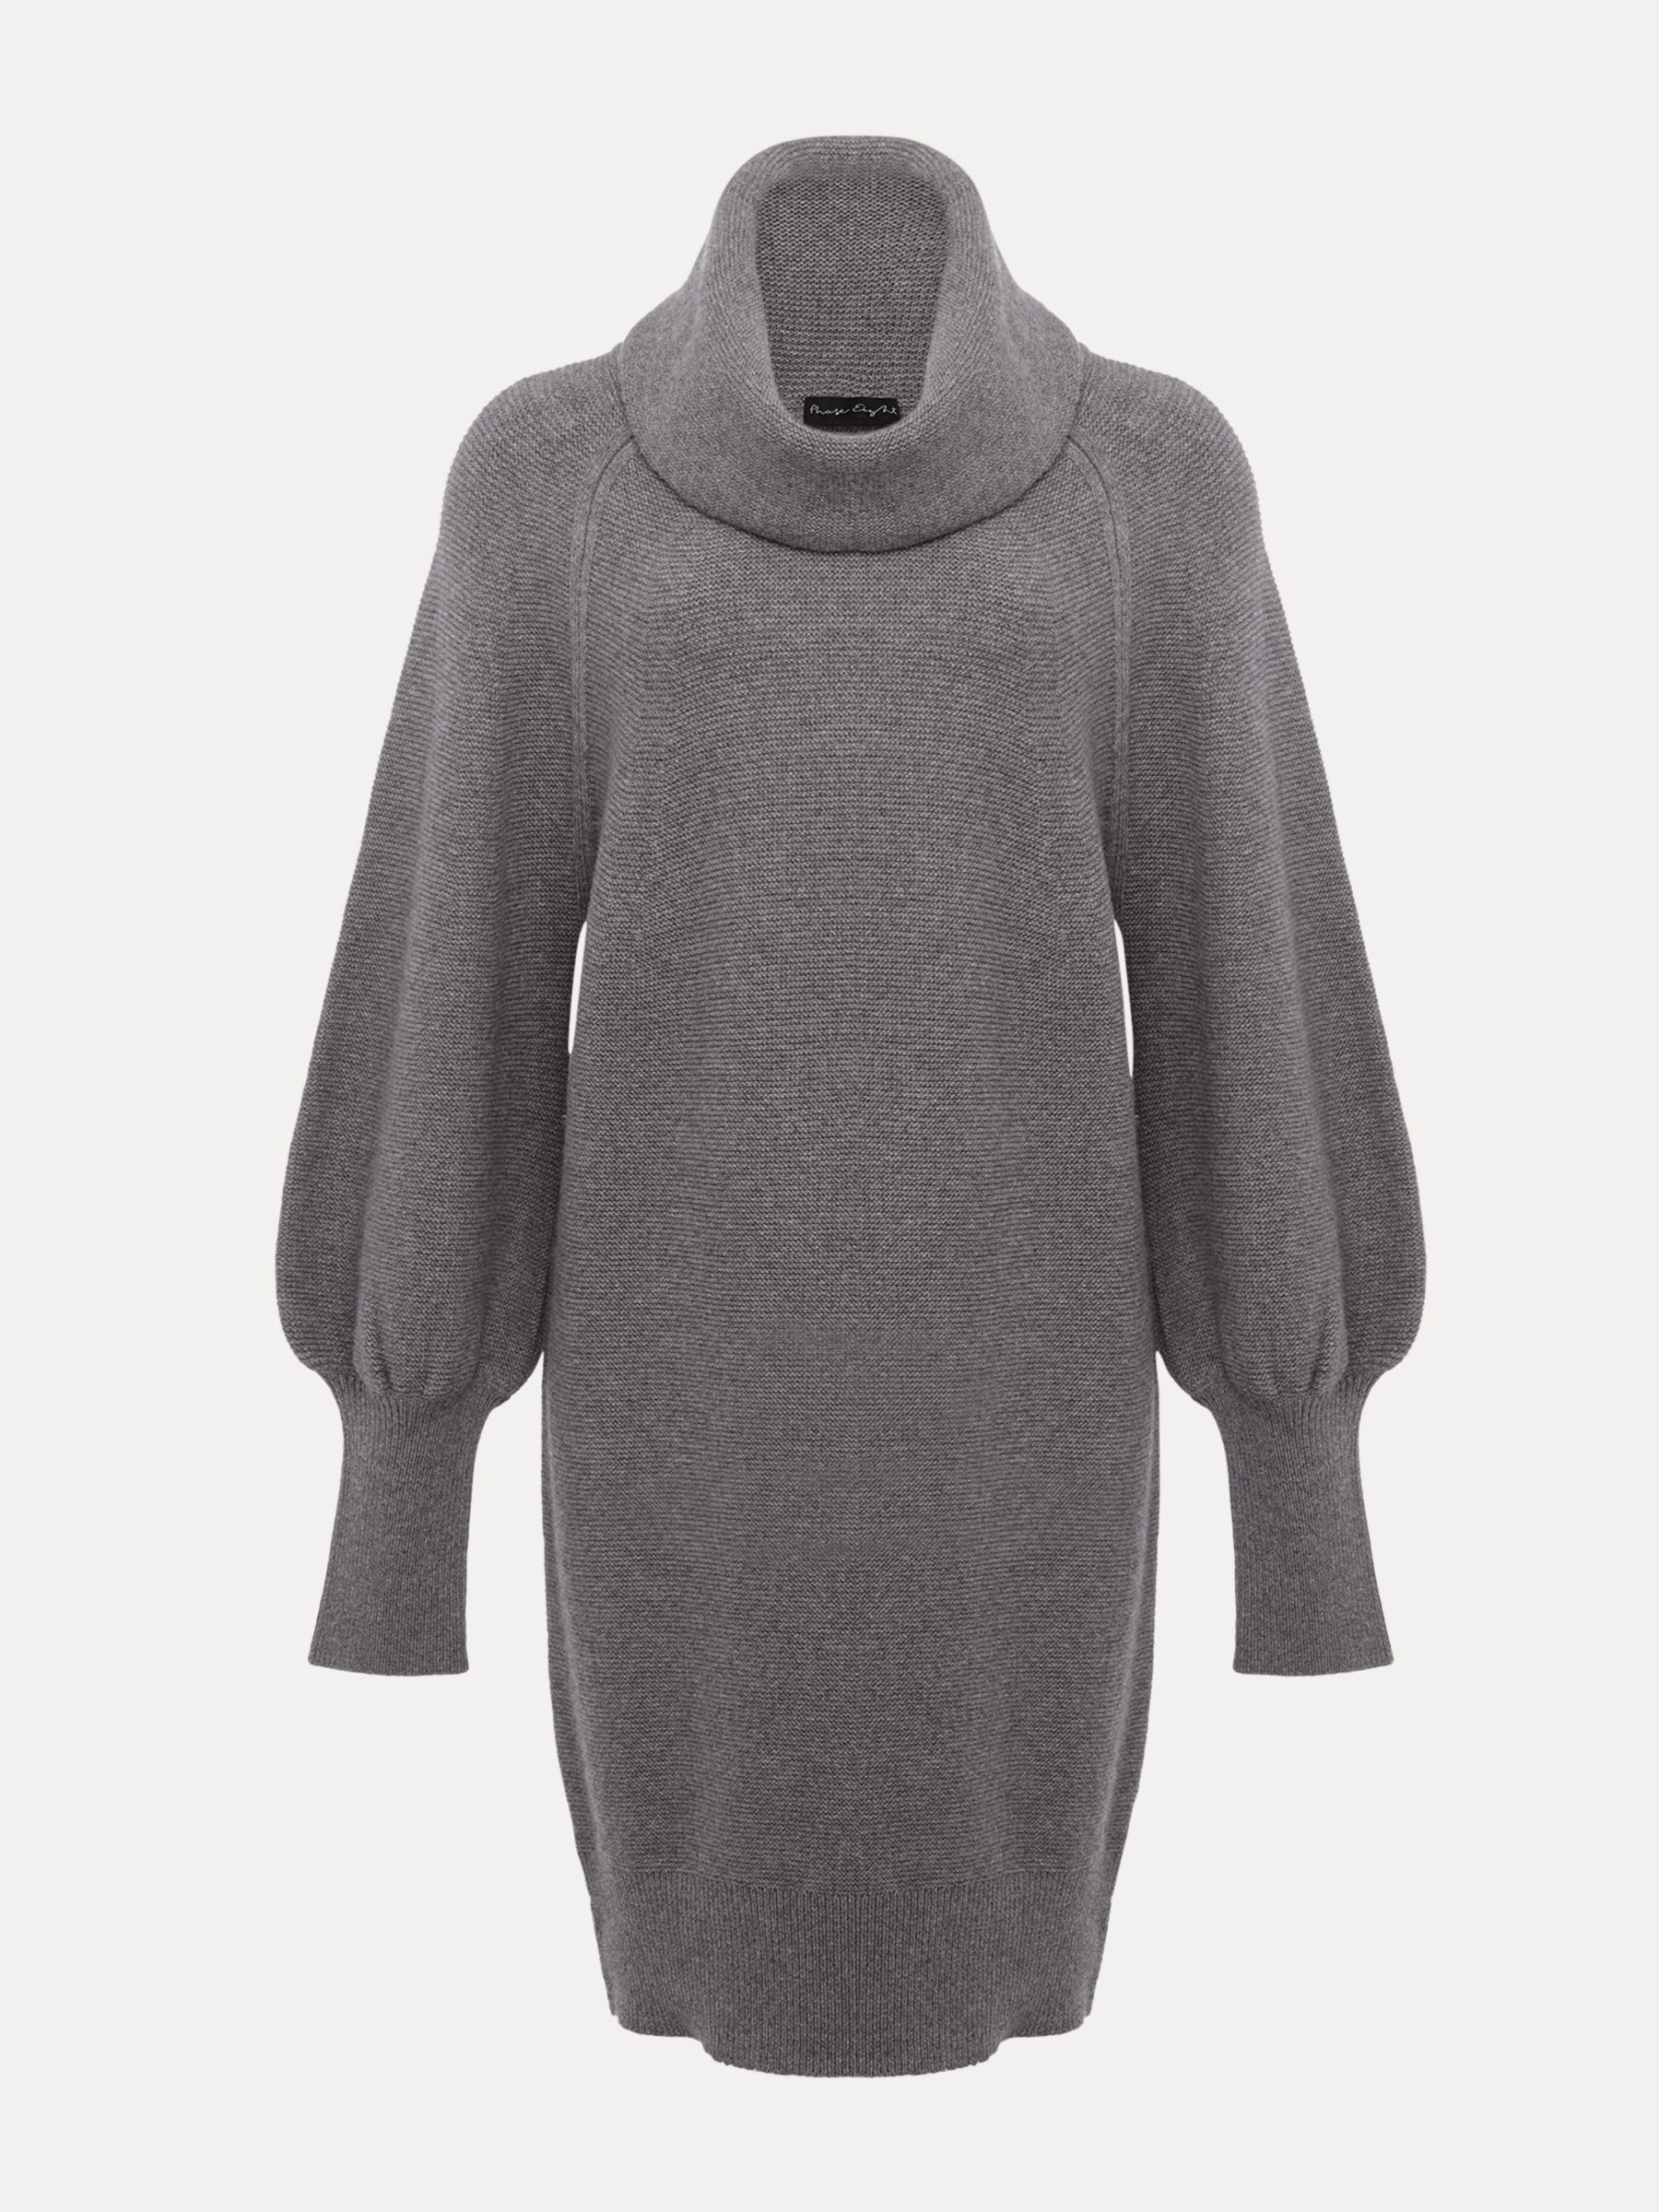 Buy Phase Eight Dahlie Knitted Cashmere Blend Jumper Mini Dress Online at johnlewis.com